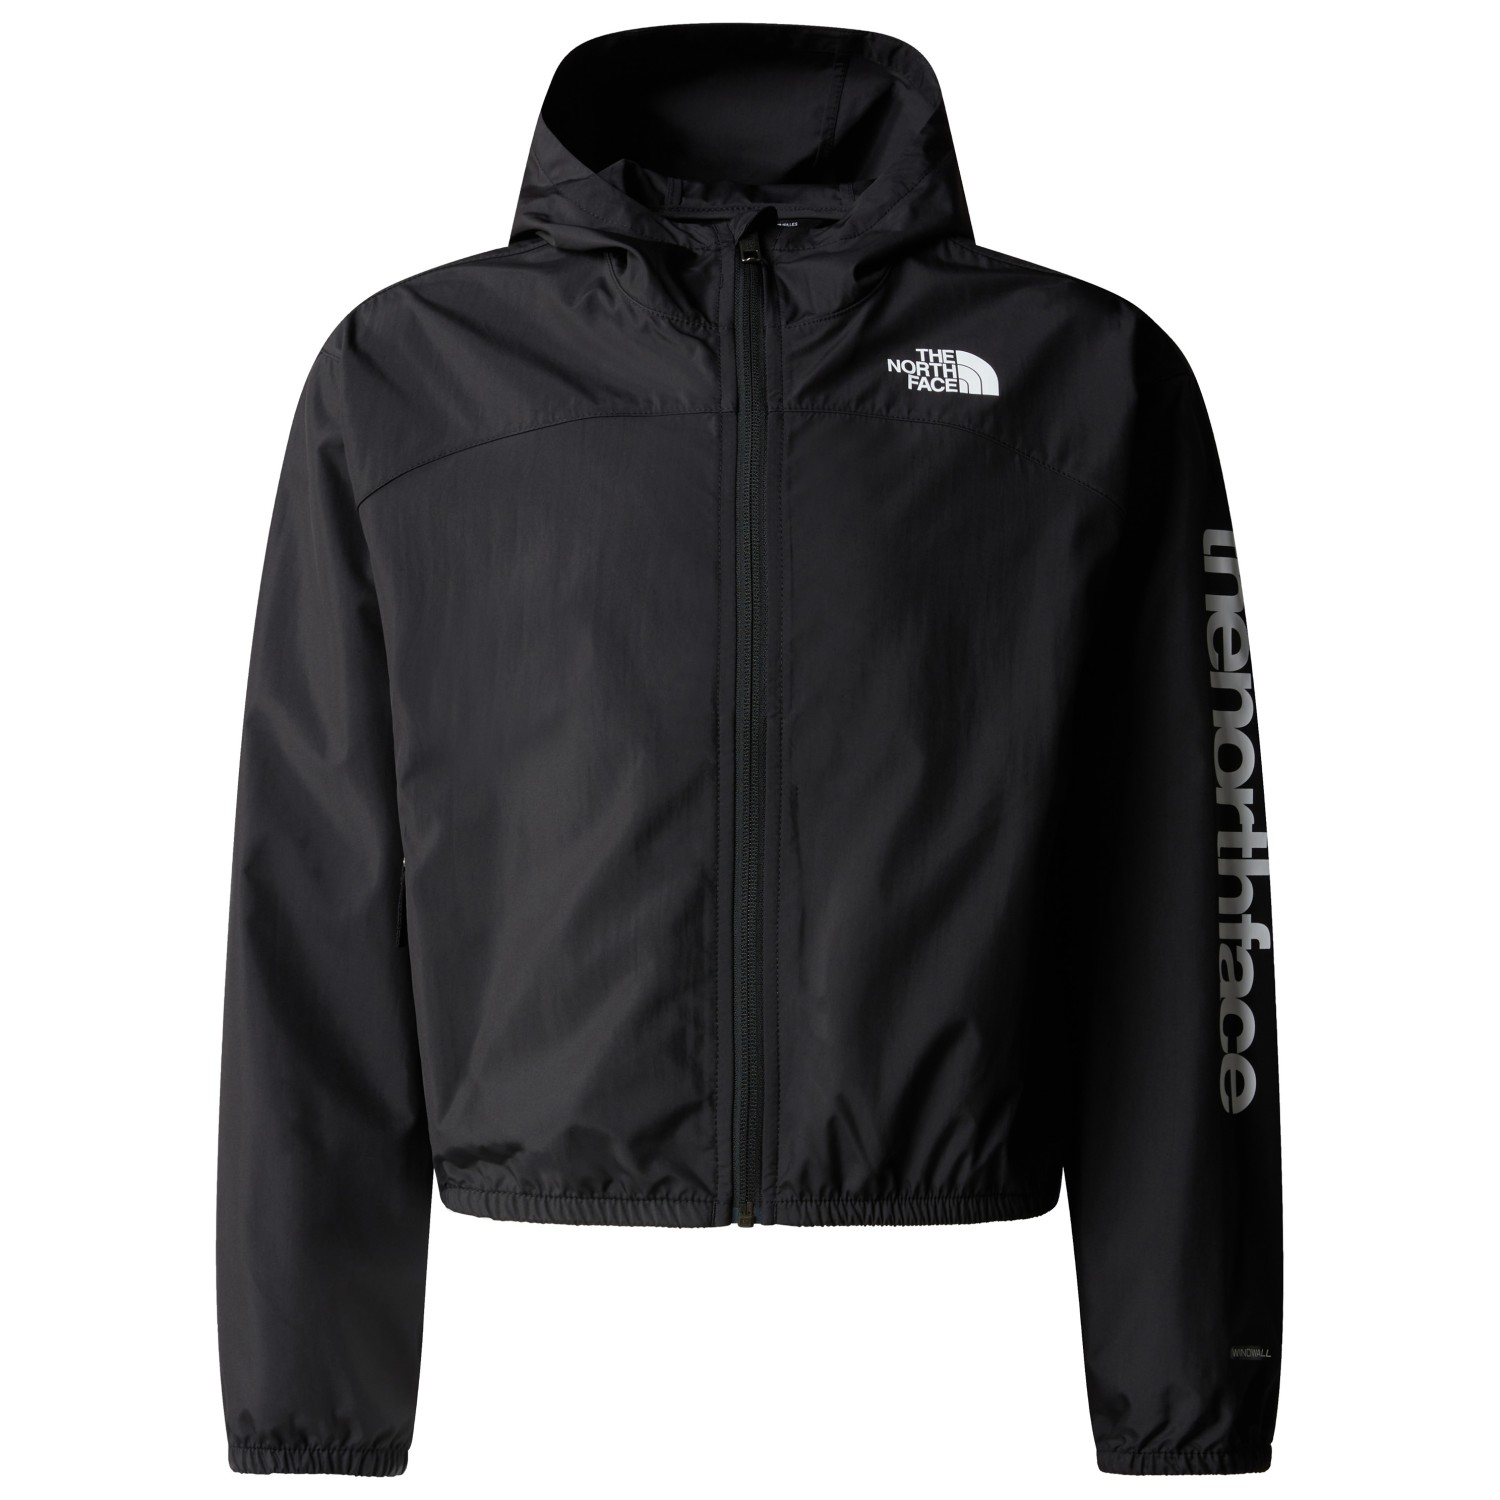 Ветровка The North Face Girl's Never Stop Hooded Windwall, цвет TNF Black куртка the north face thermoball hooded синий